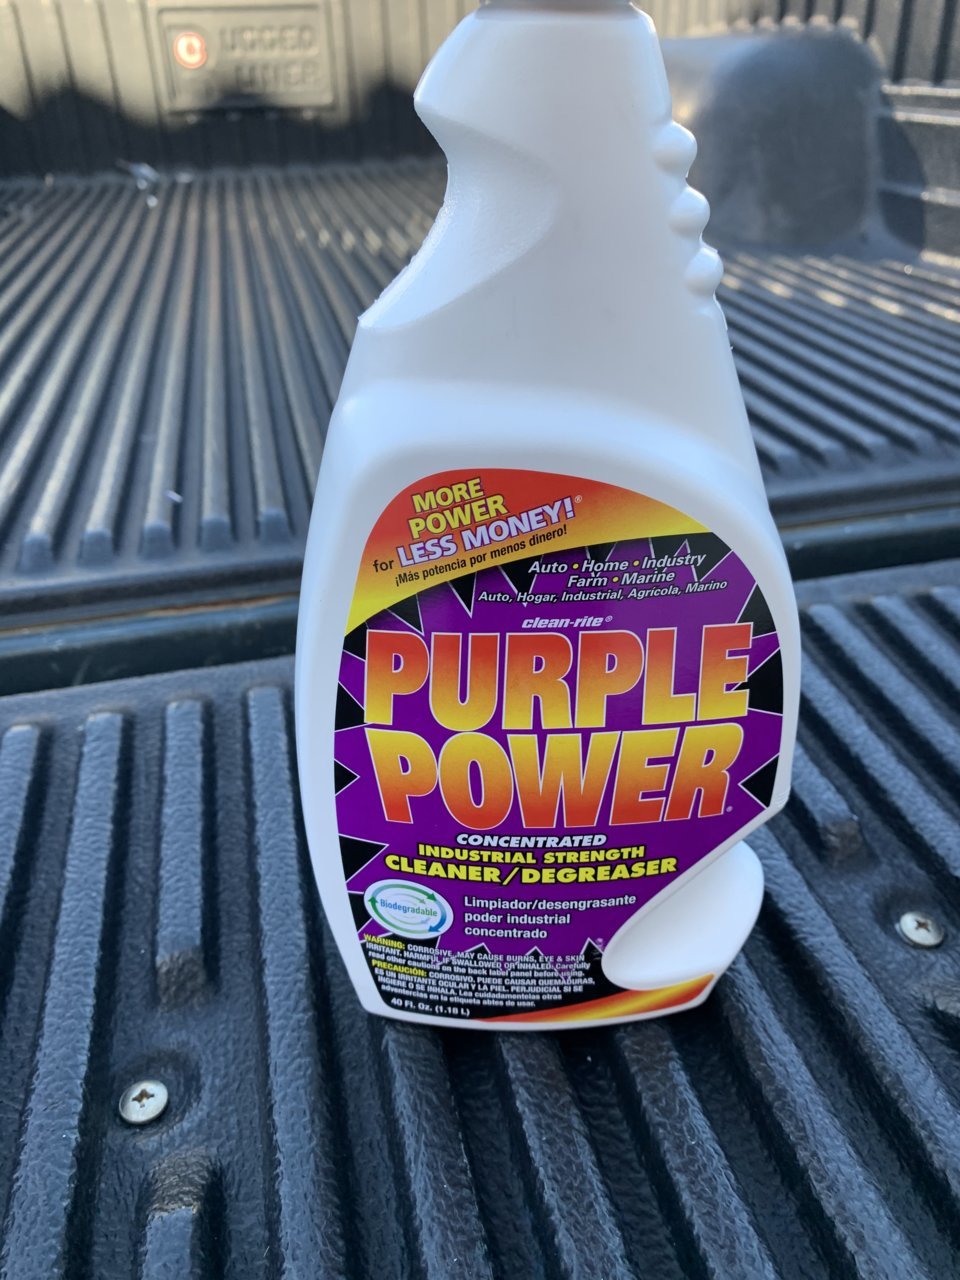 Purple Power Concentrated Industrial Cleaner Degreaser!!! 